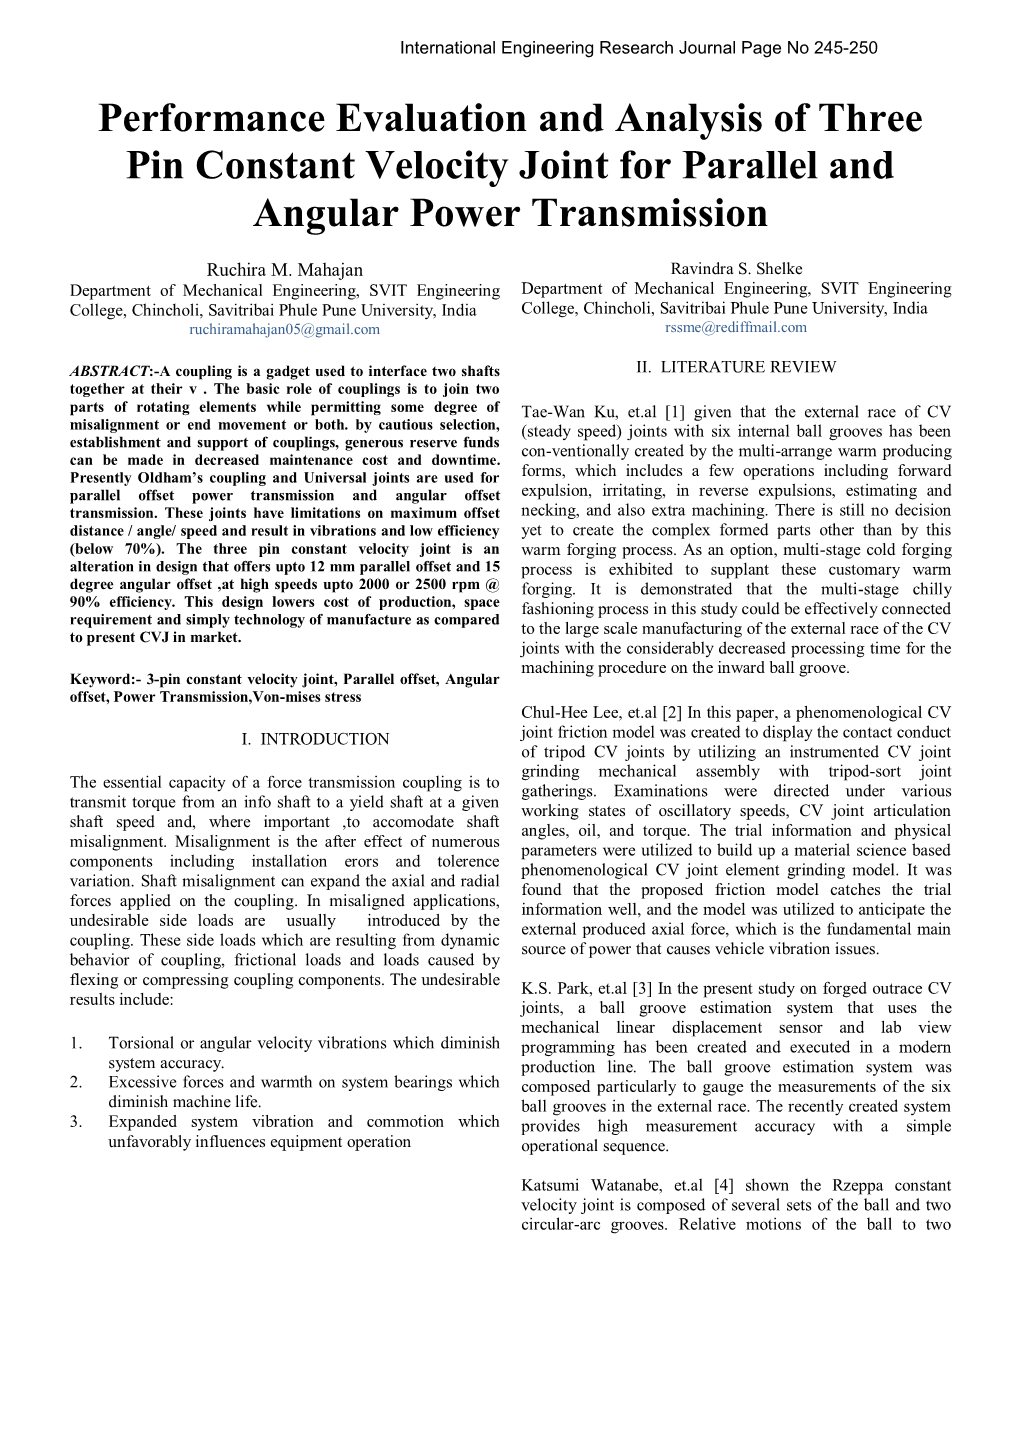 Performance Evaluation and Analysis of Three Pin Constant Velocity Joint for Parallel and Angular Power Transmission